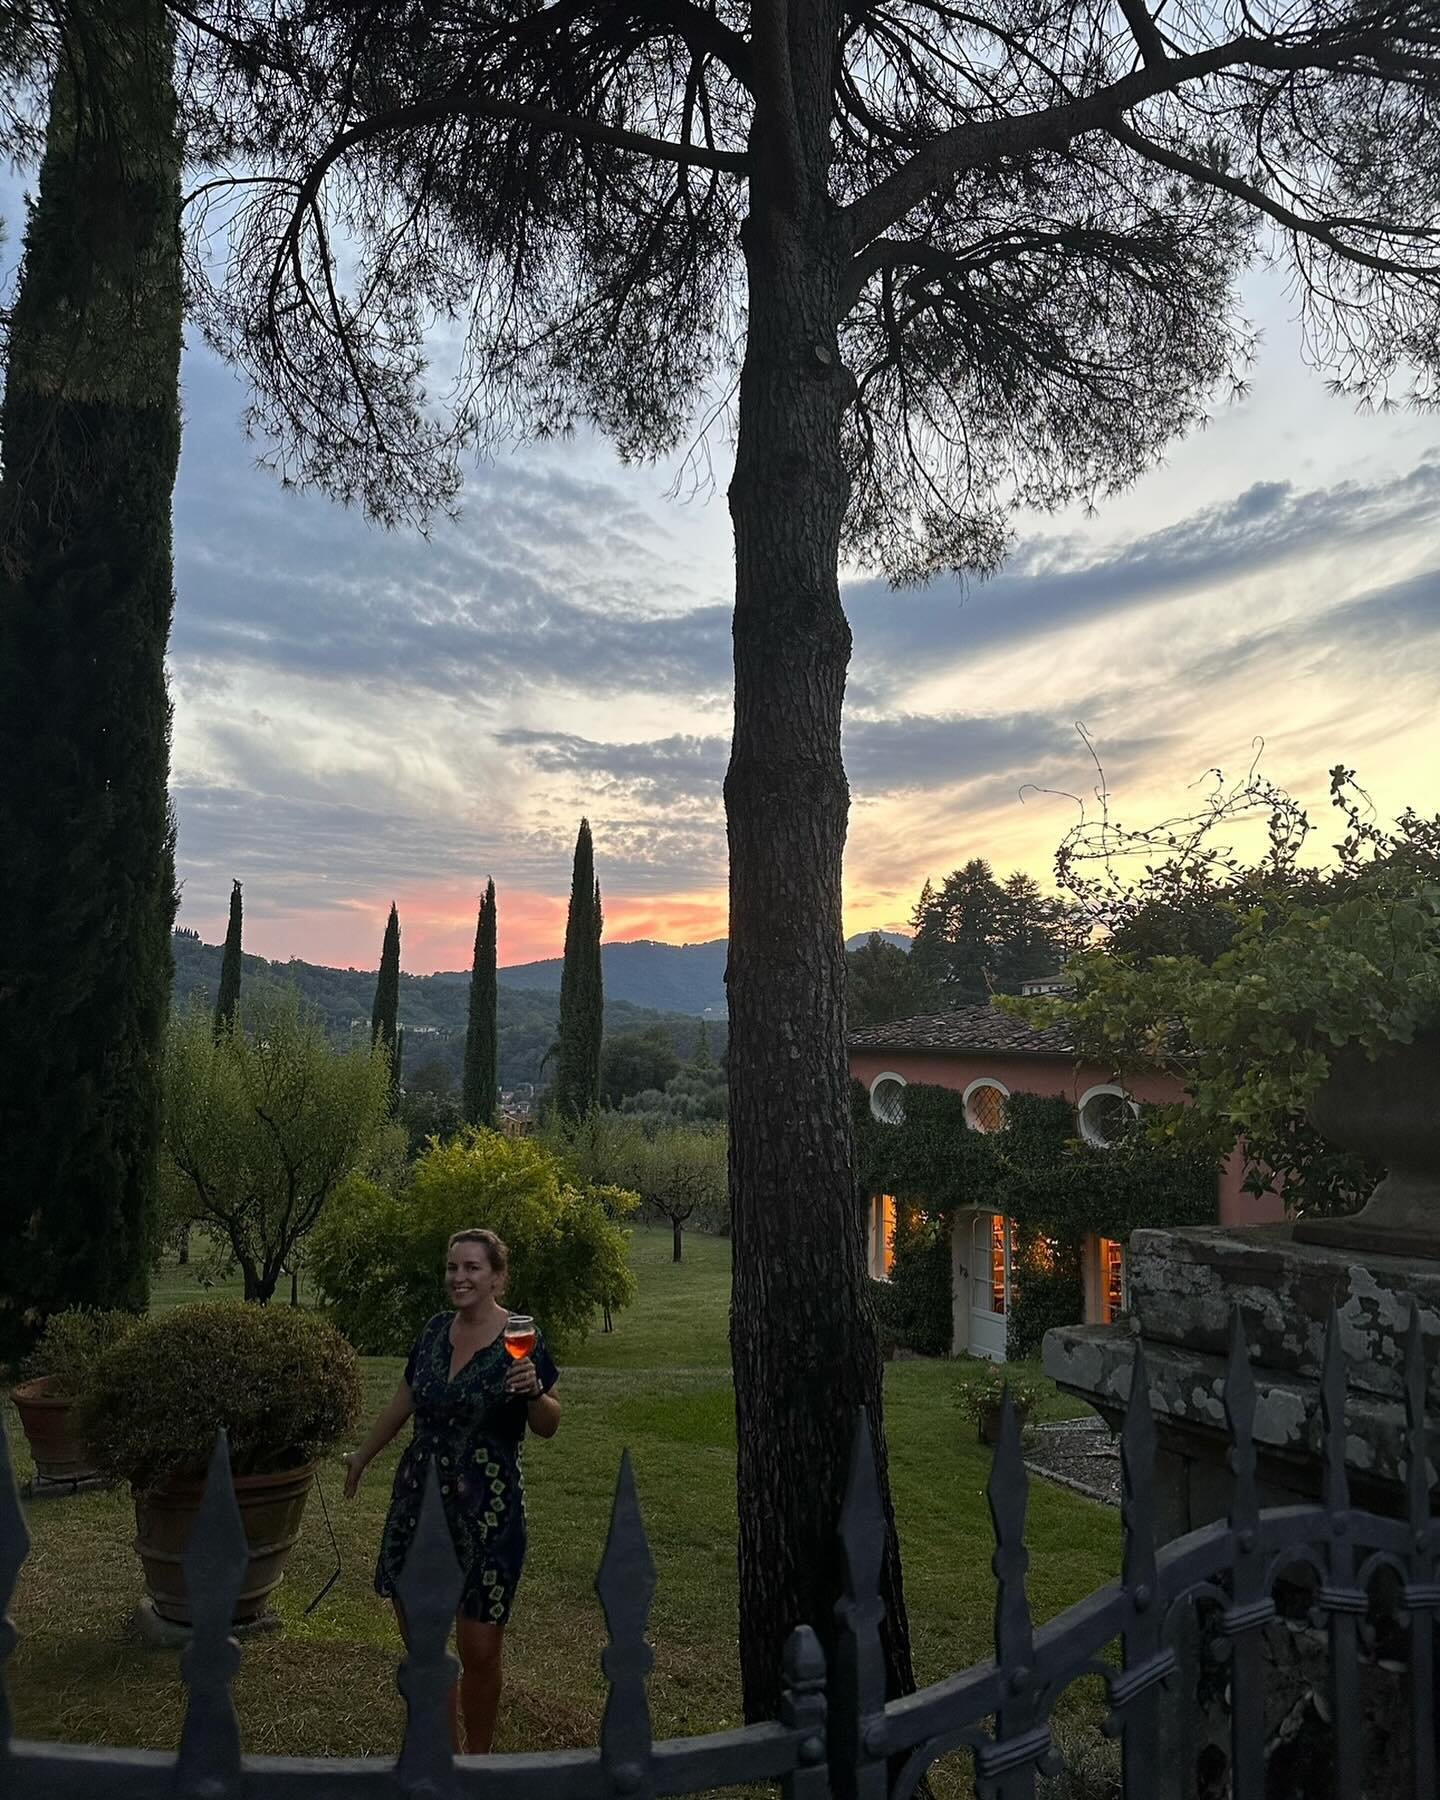 Sunset cocktails in the Villa garden with Katrina. 🧡 Photo by one of our Villa Babes!! Please let us know which one so we can credit you! 😘